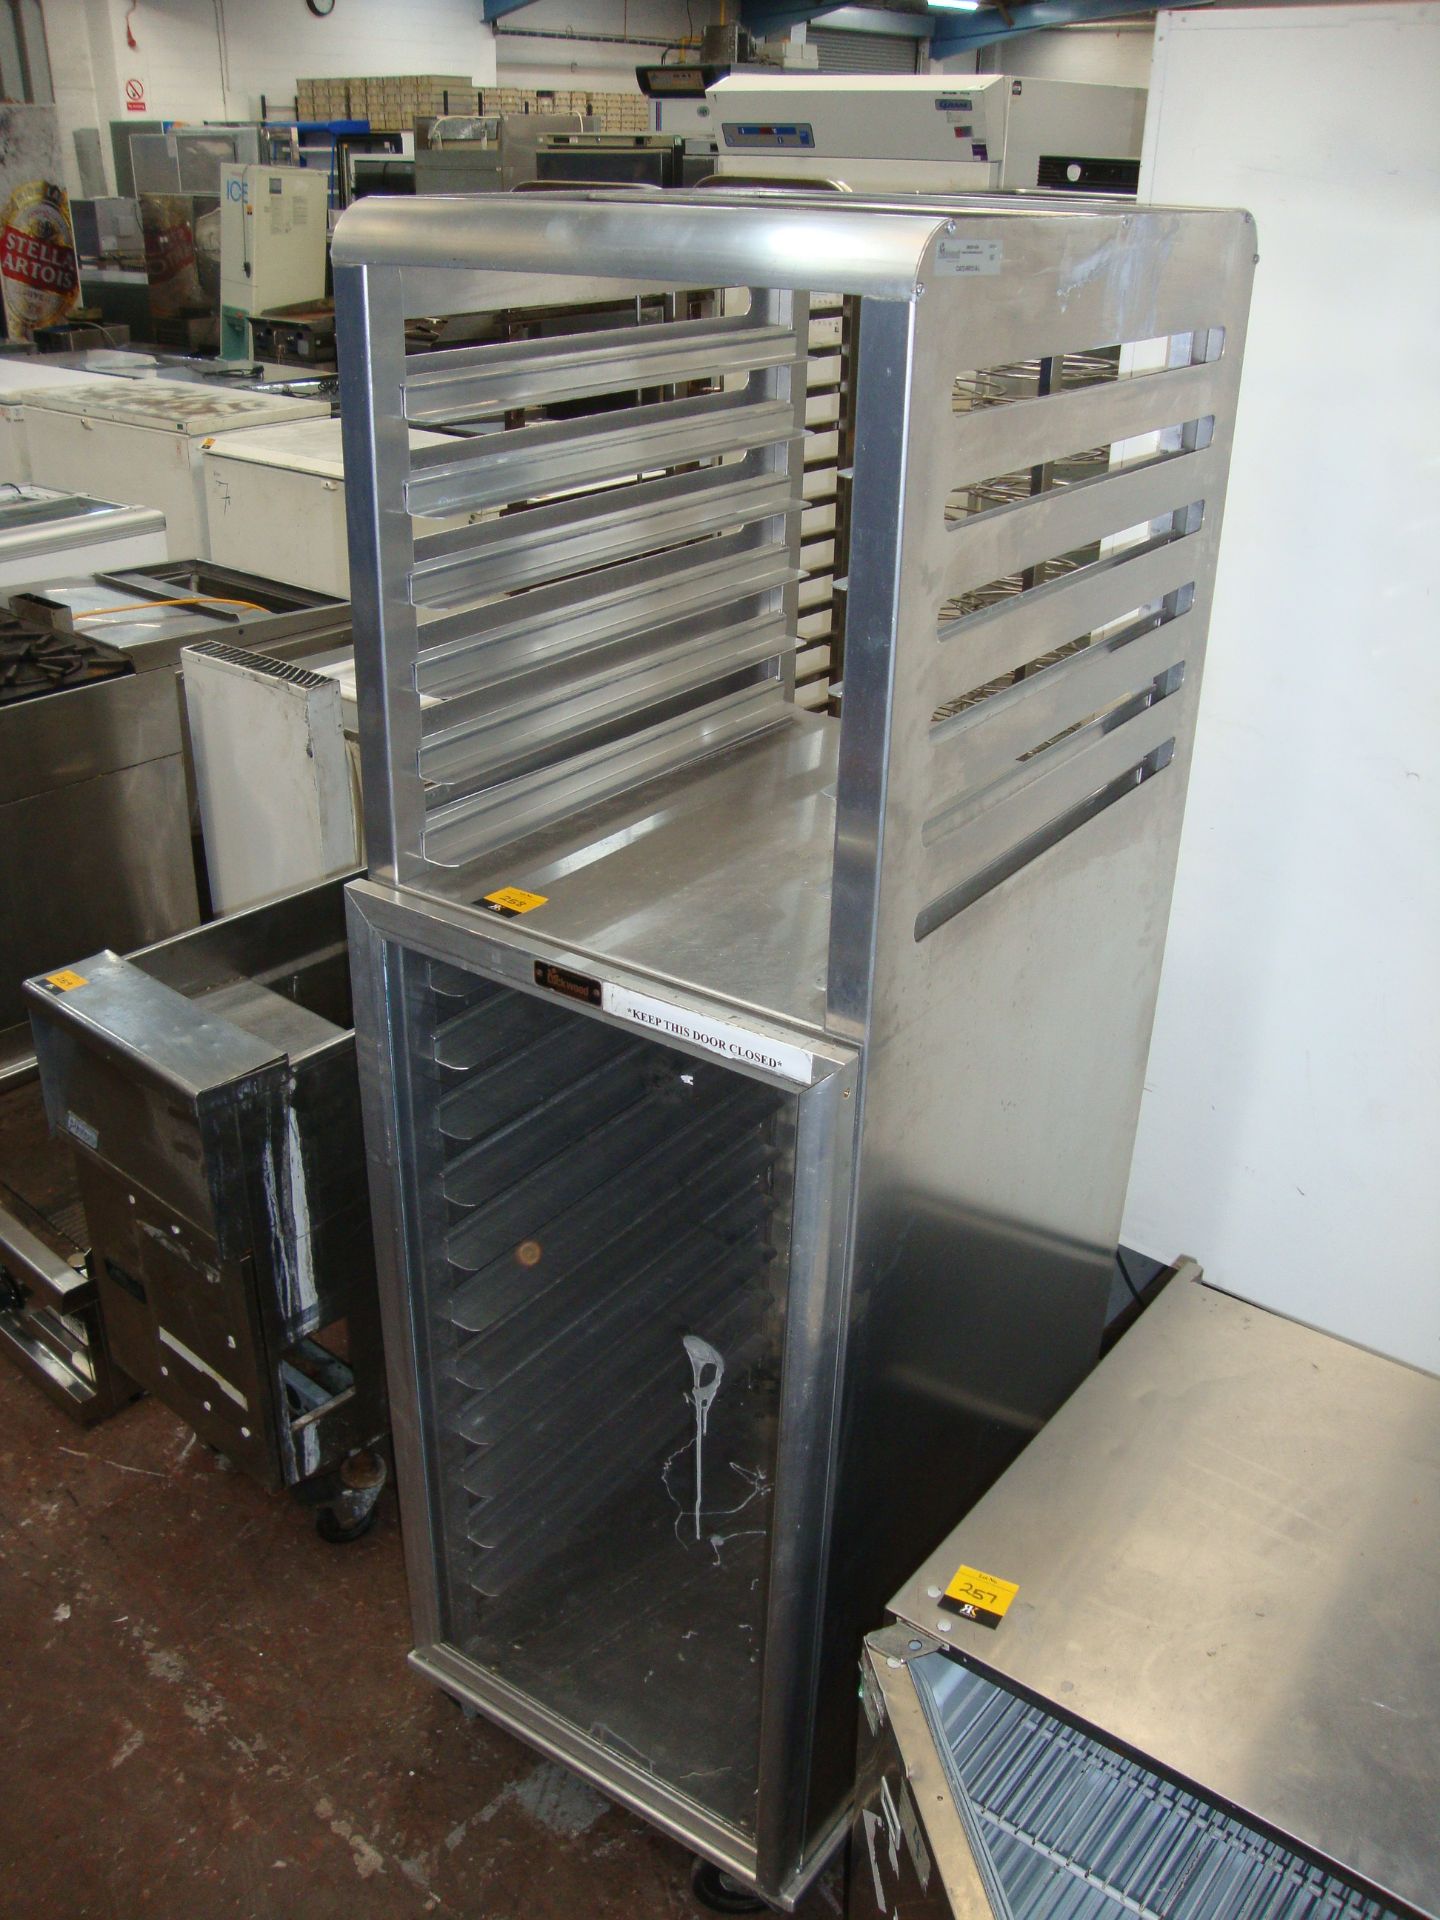 Mobile stainless steel unit comprising clear front storage compartment below and shelving for